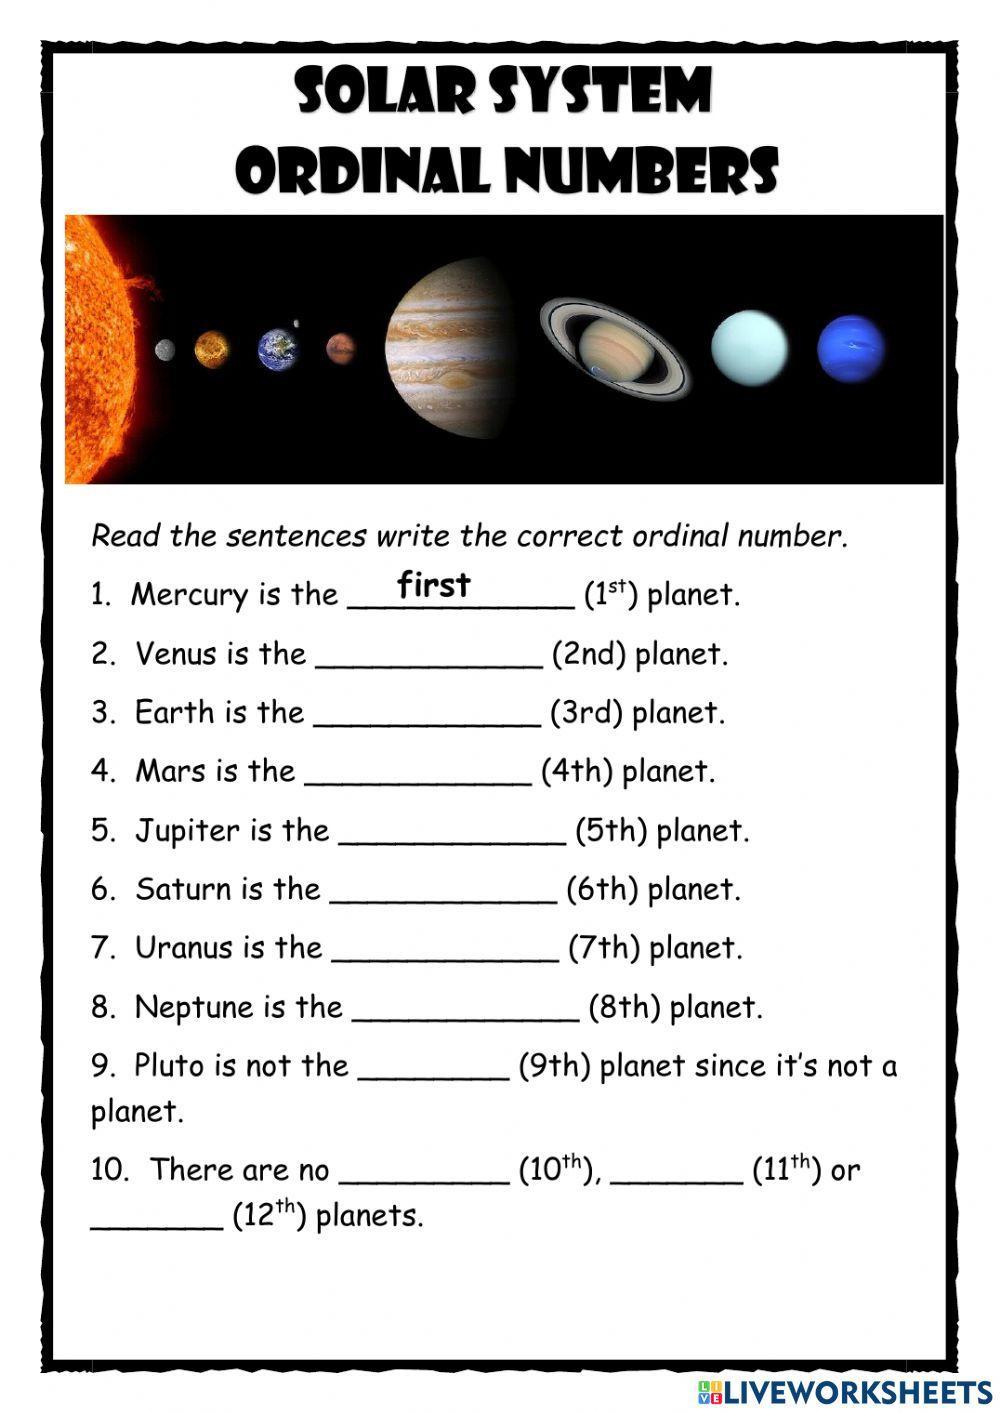 Solar System Ordinal Numbers